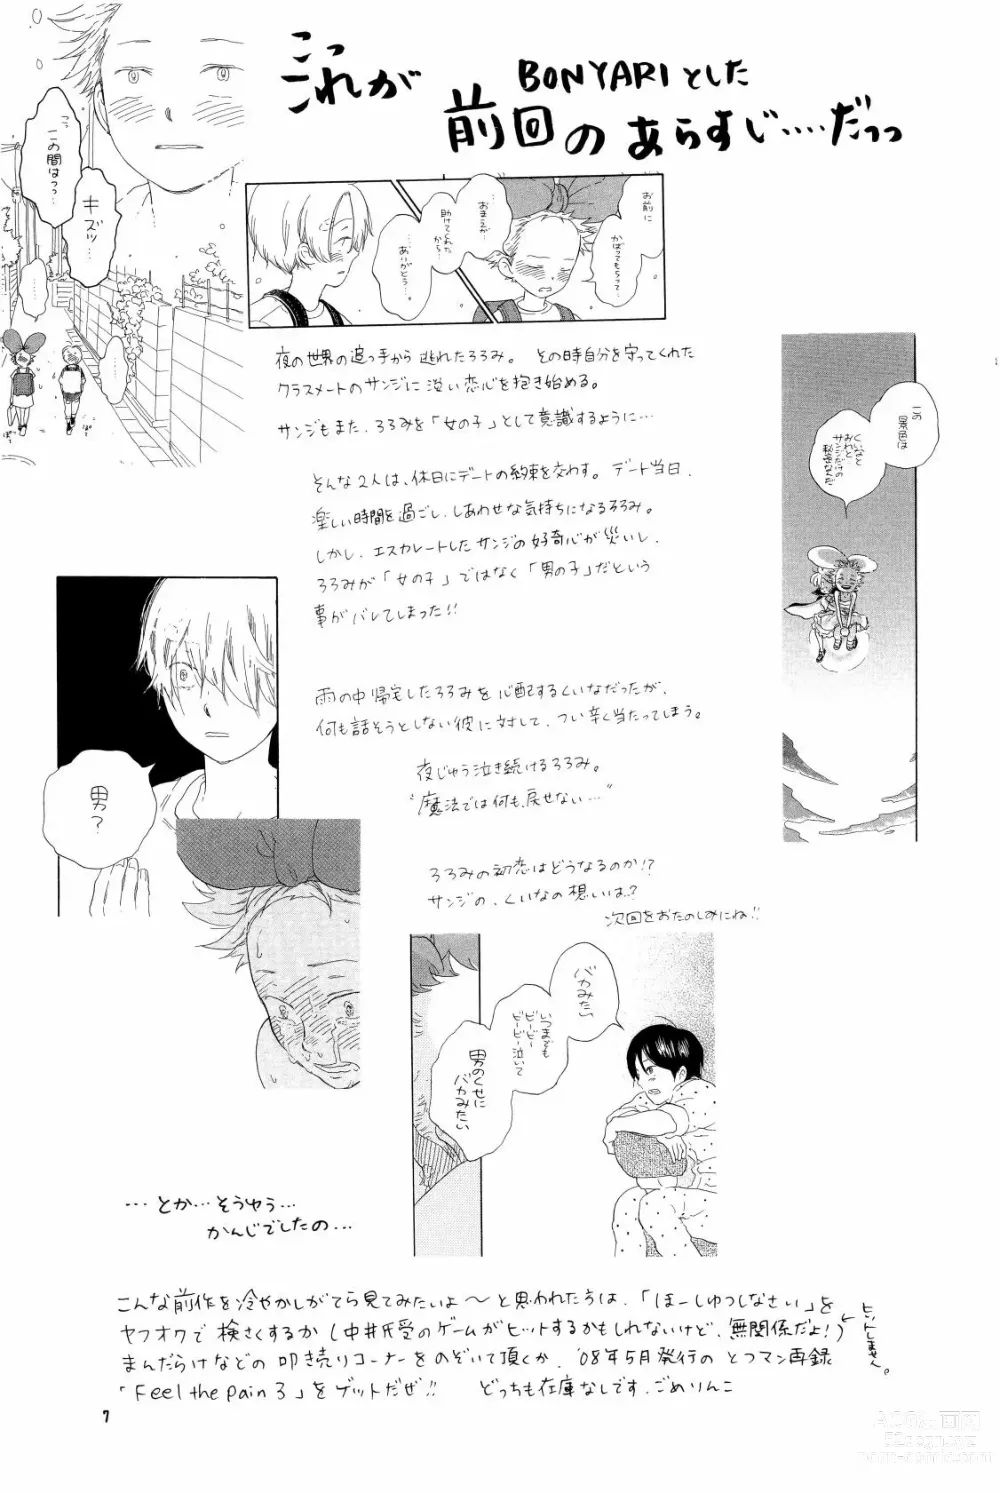 Page 6 of doujinshi your song